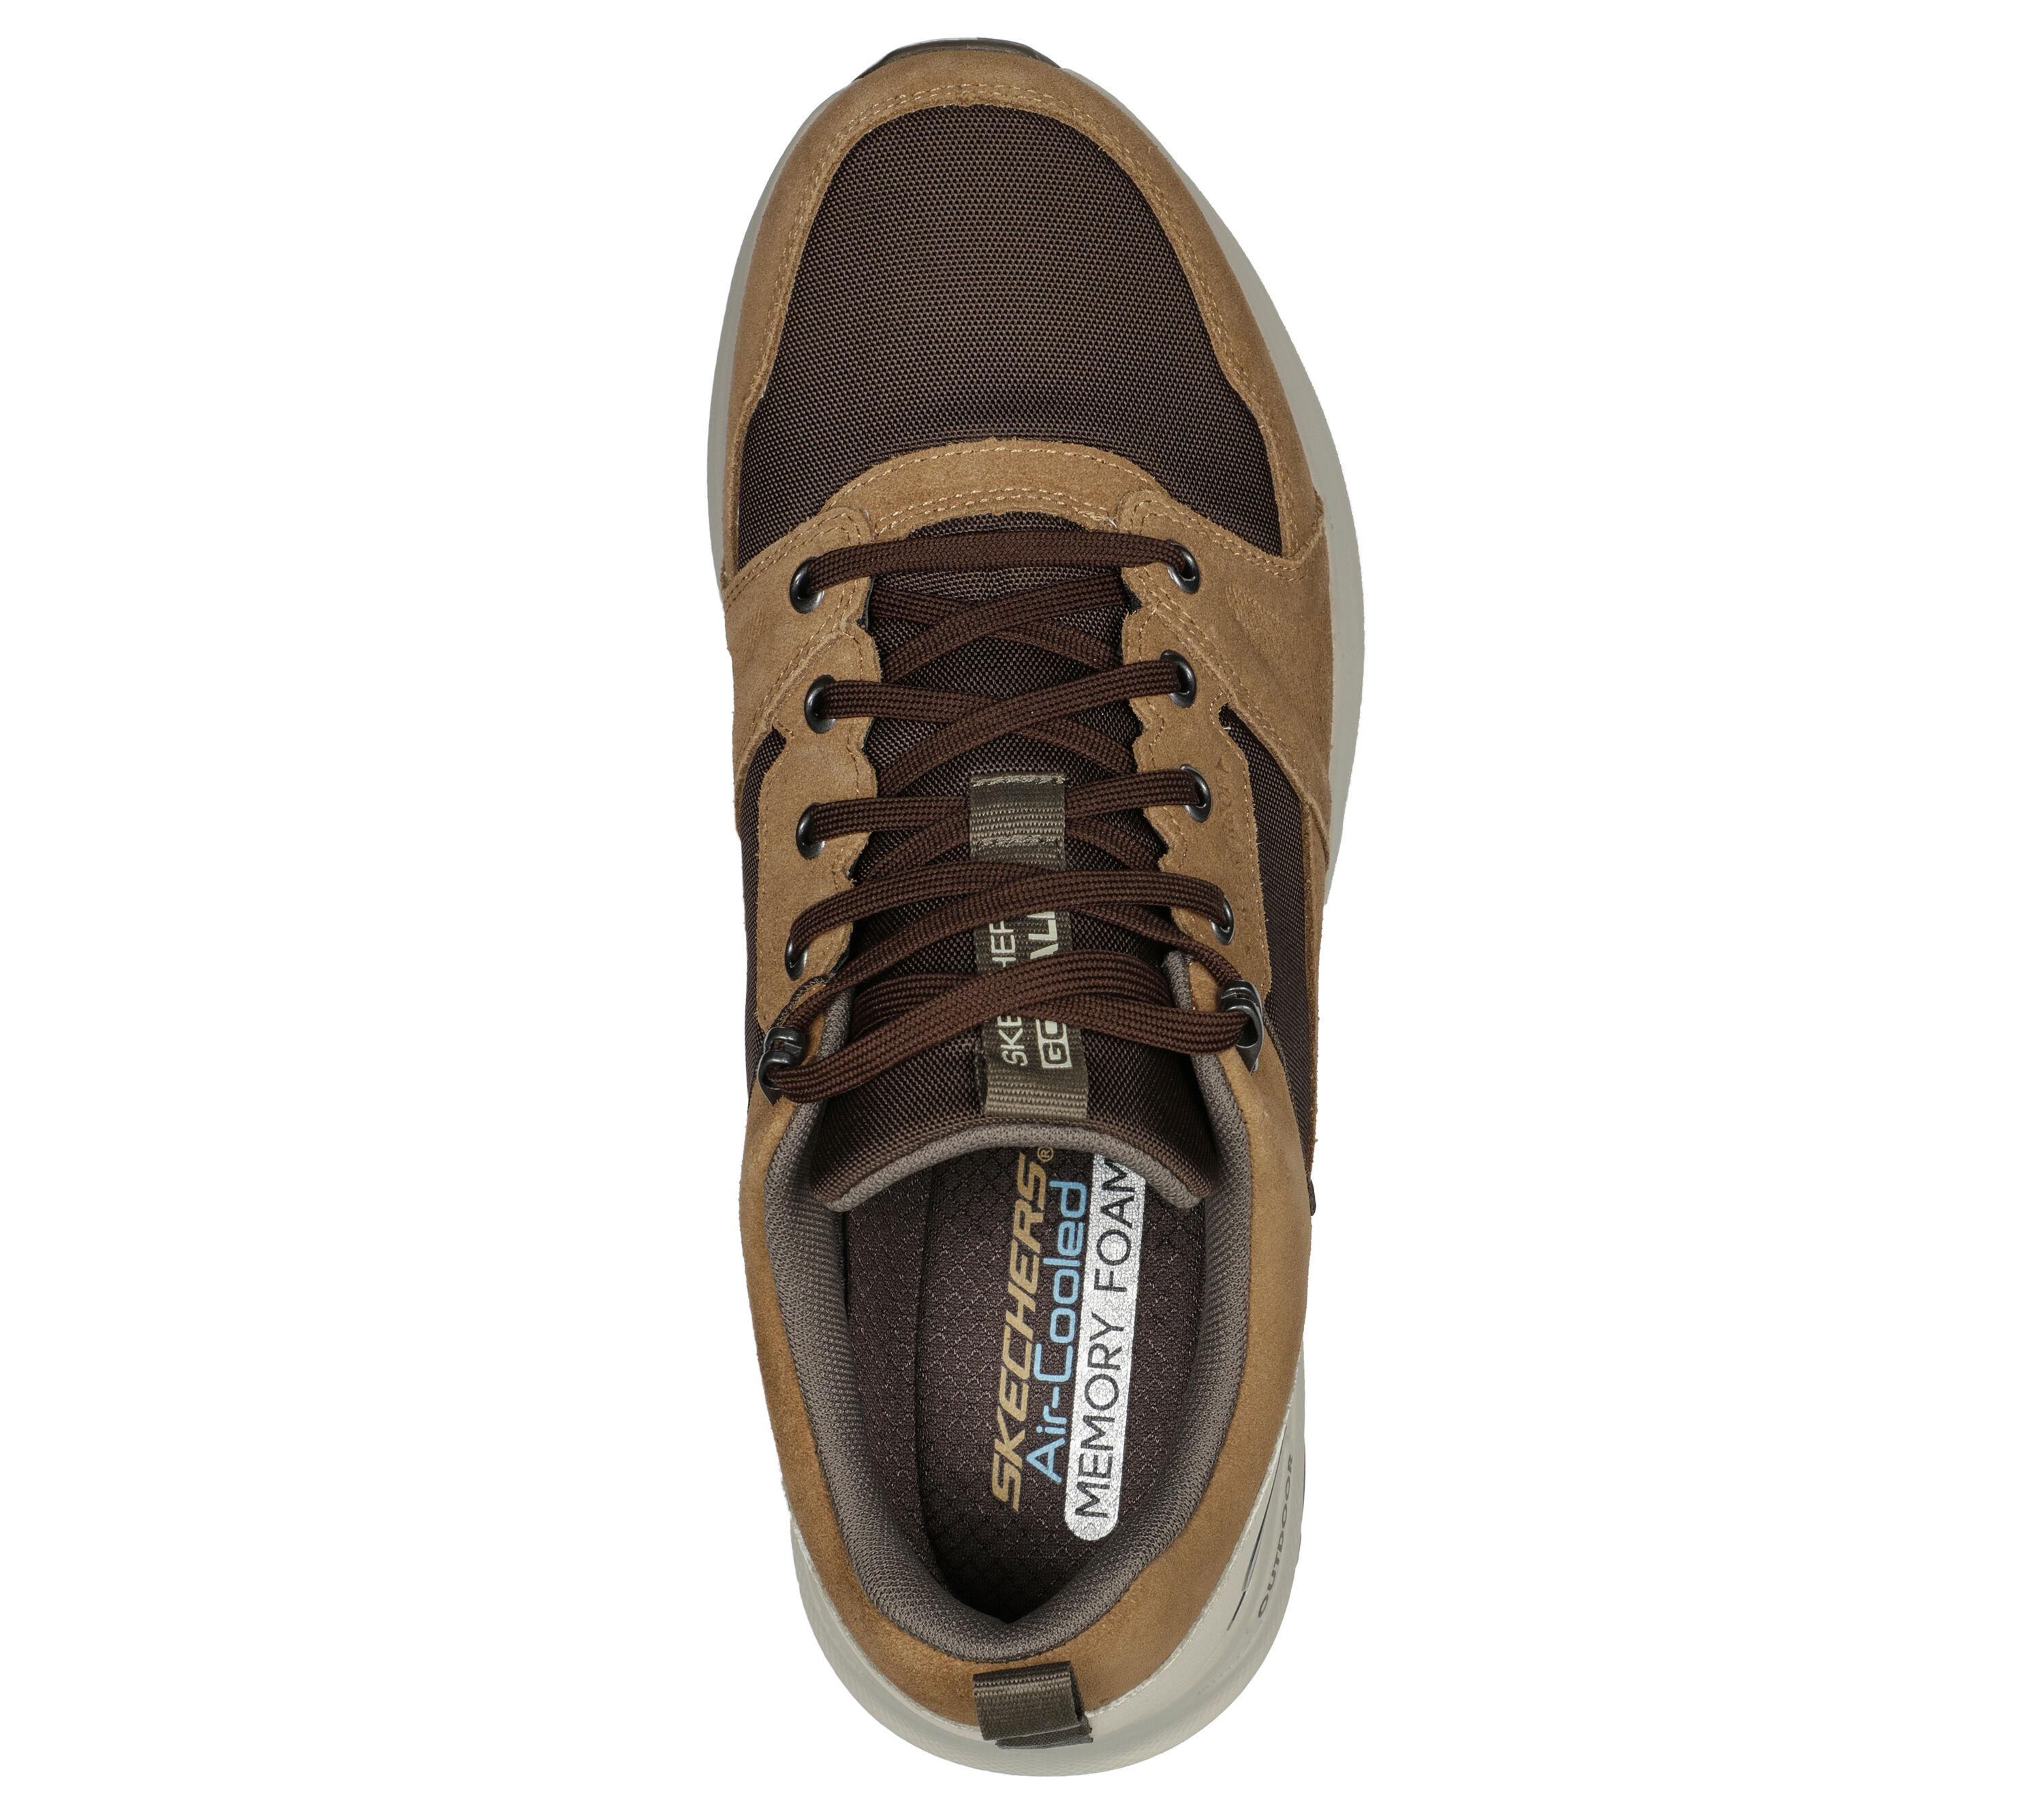 Go Walk Outdoor - Massif - Brown / Tan Leather/Synthetic